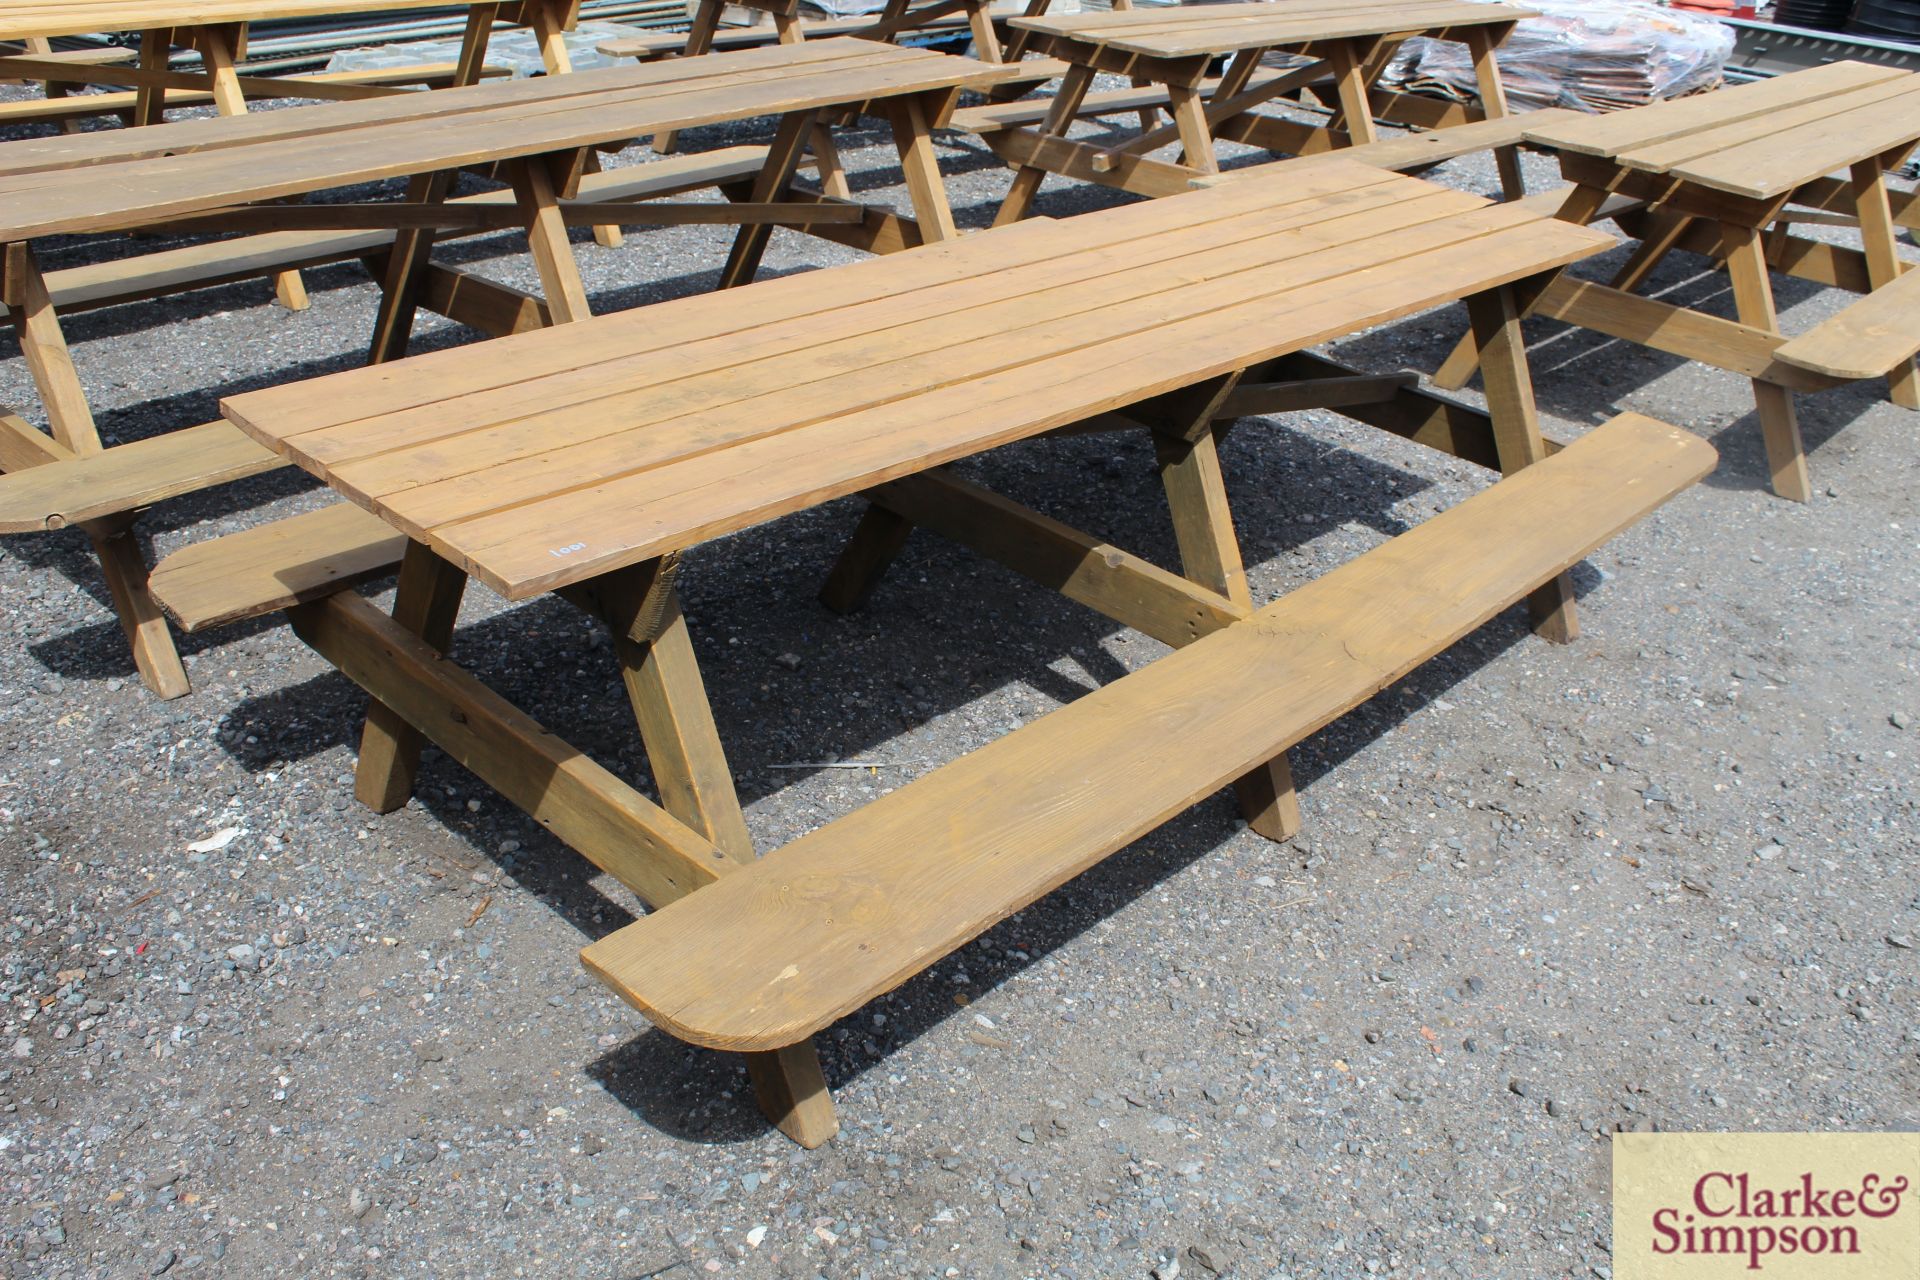 8ft wooden picnic bench.